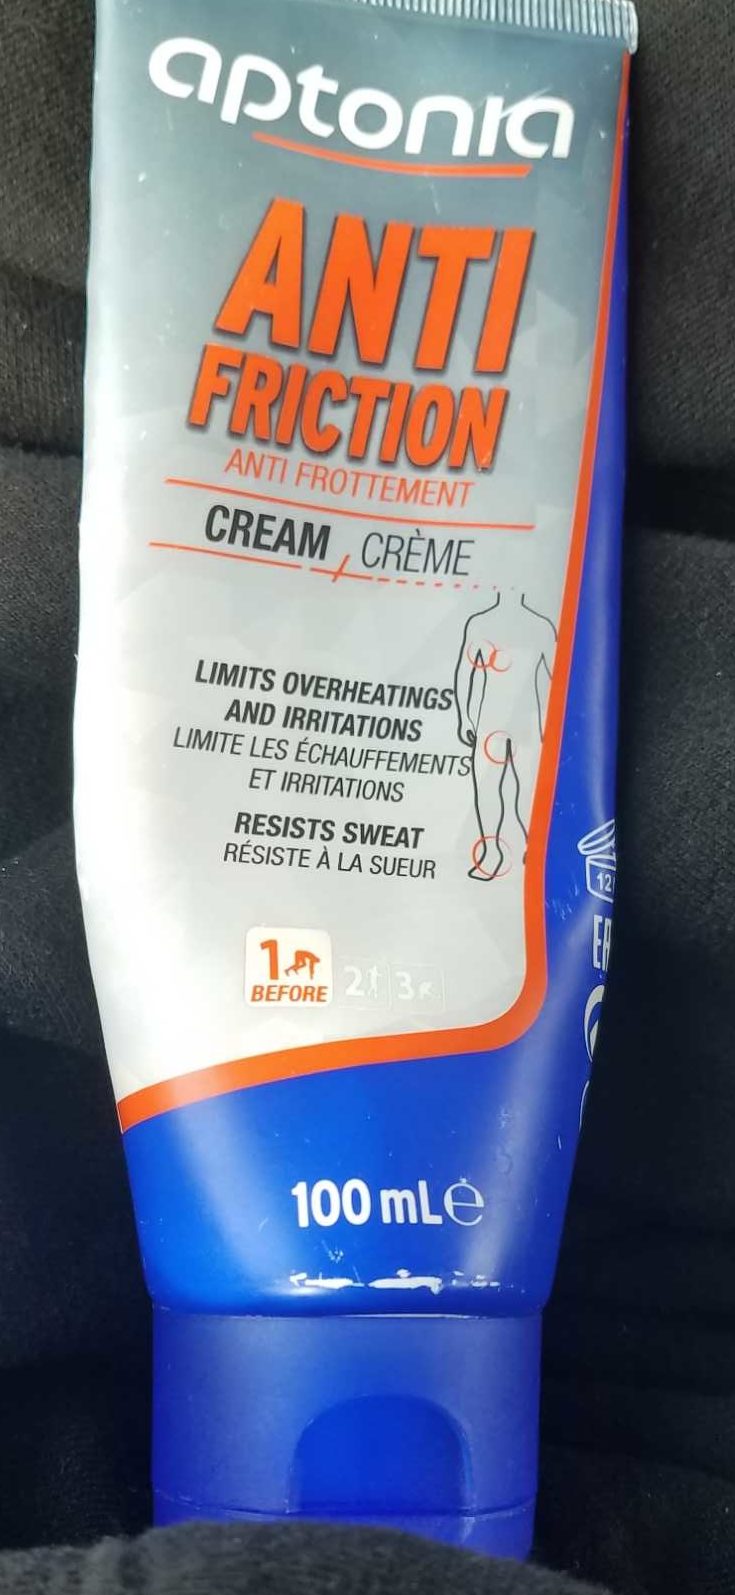 Crème anti-friction - Product - fr